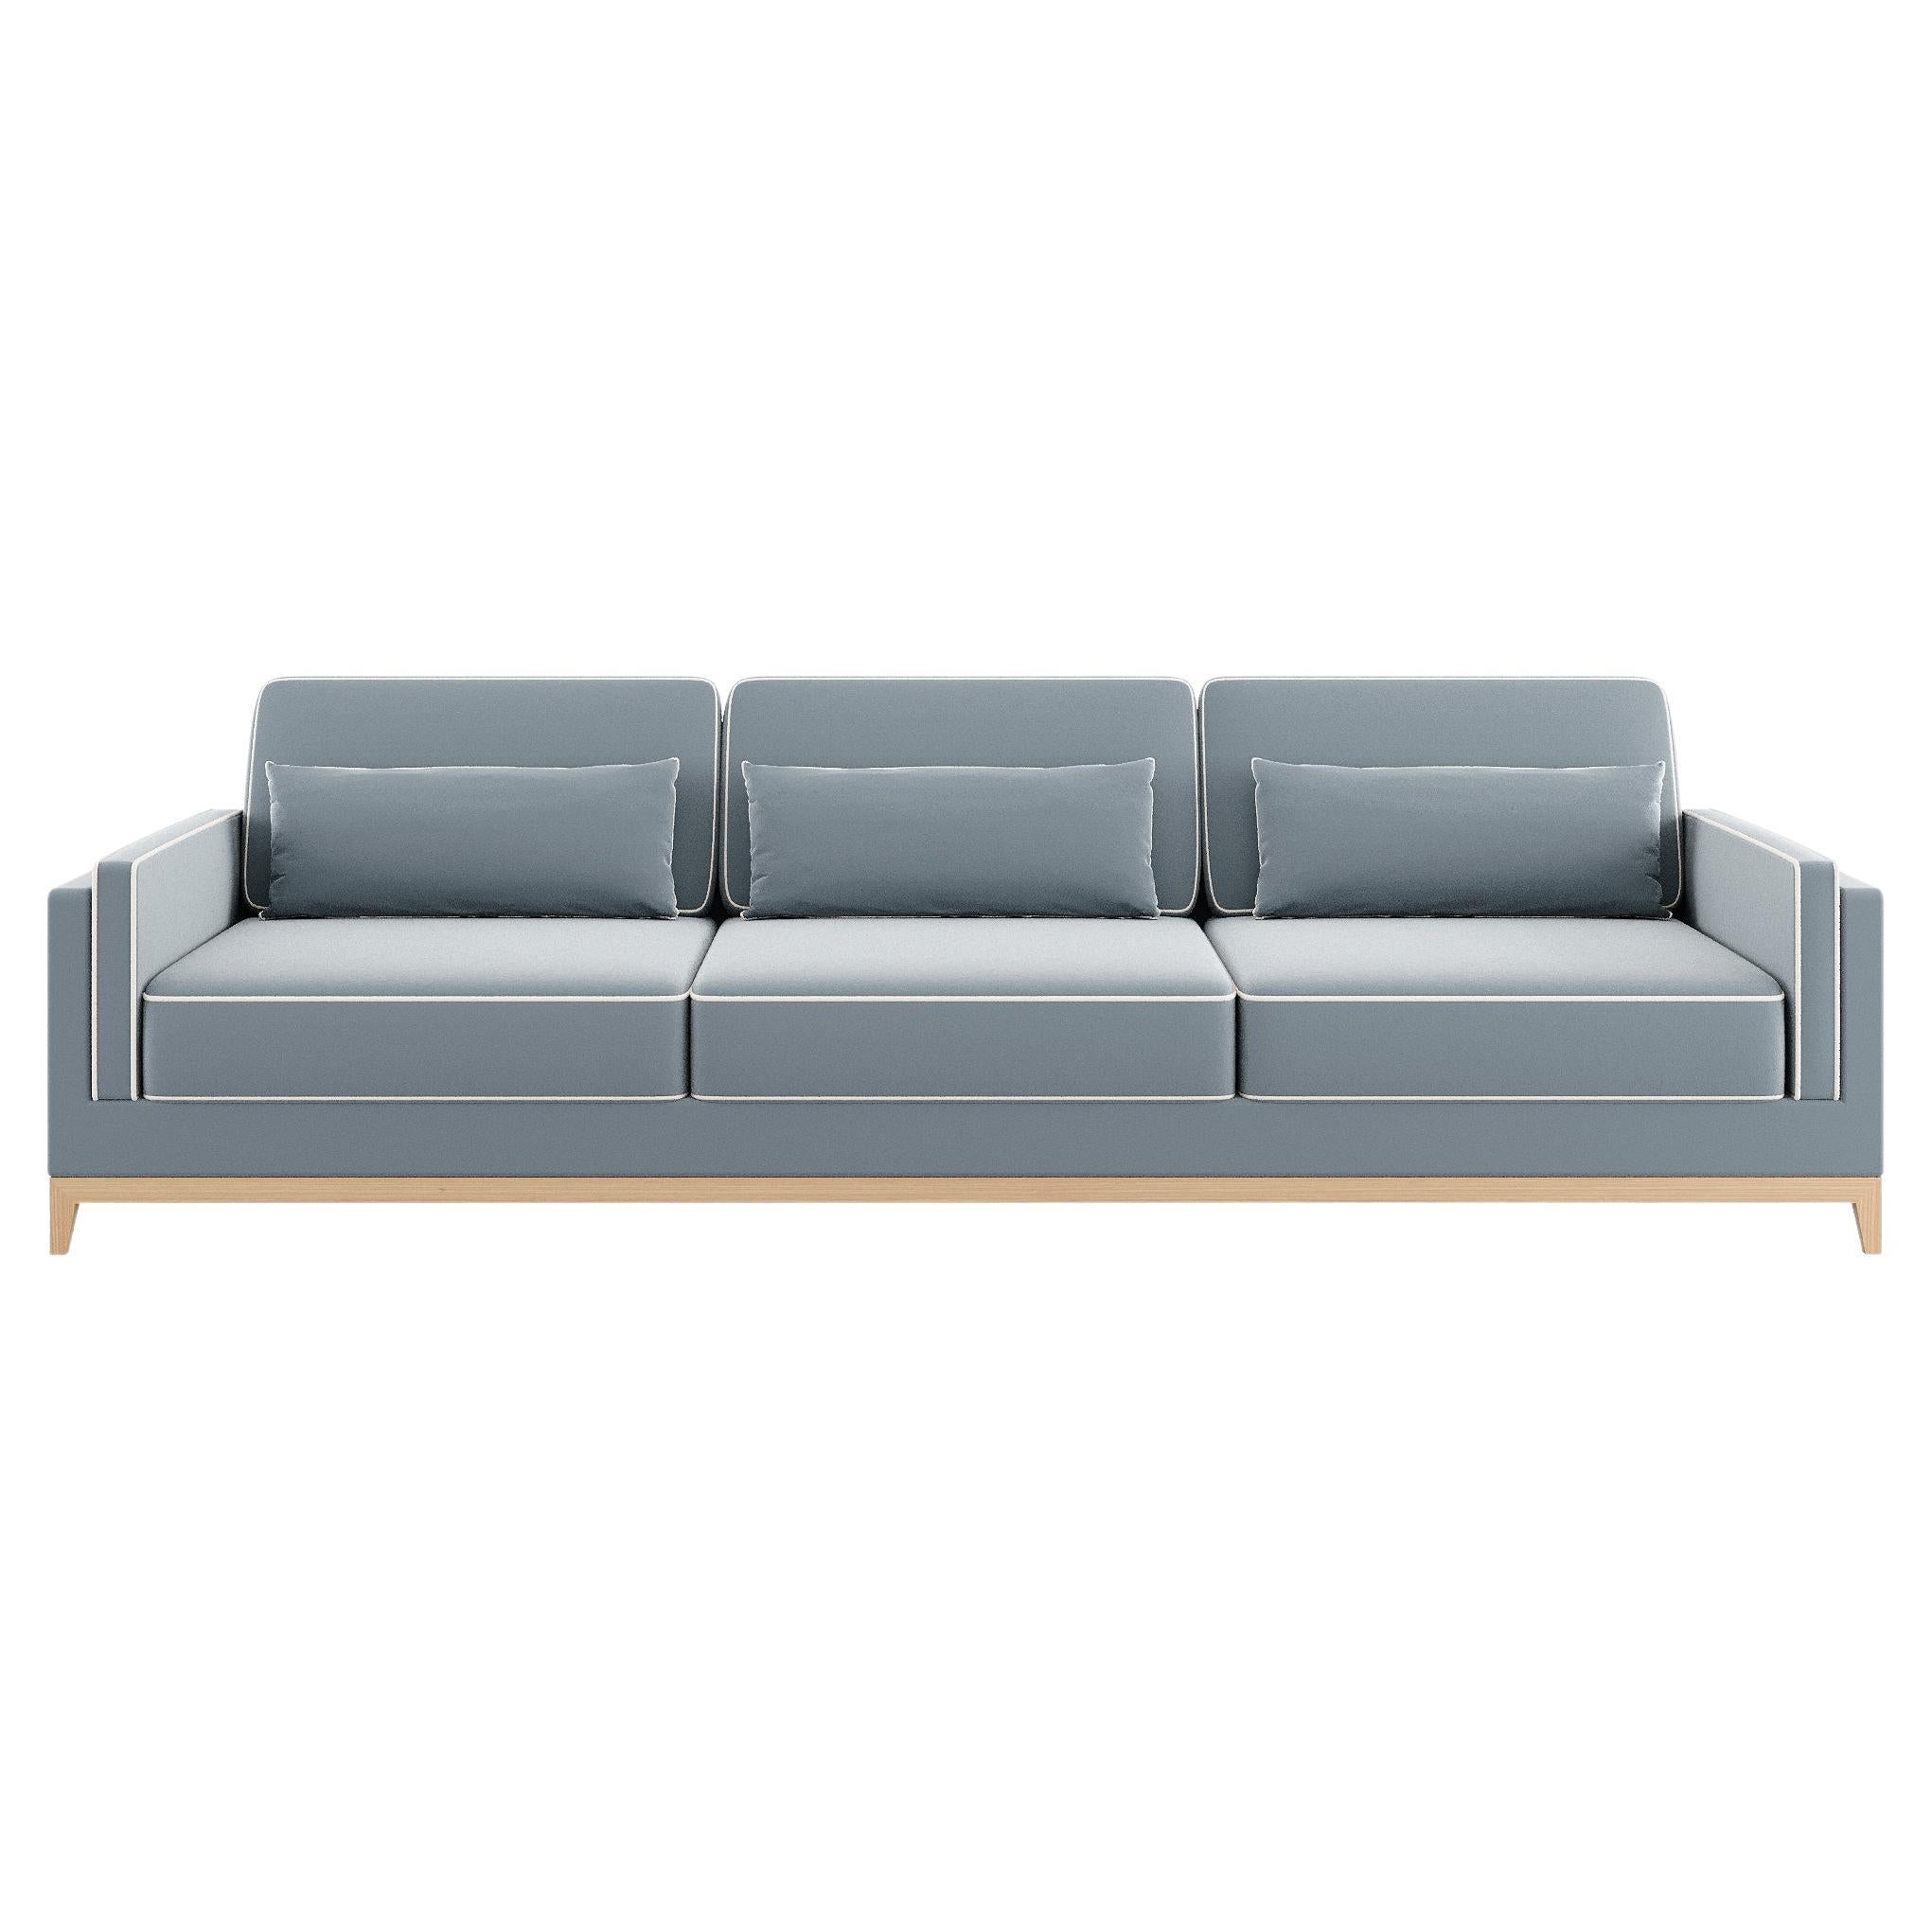 SINATRA Modular Sofa with solid wood feet For Sale